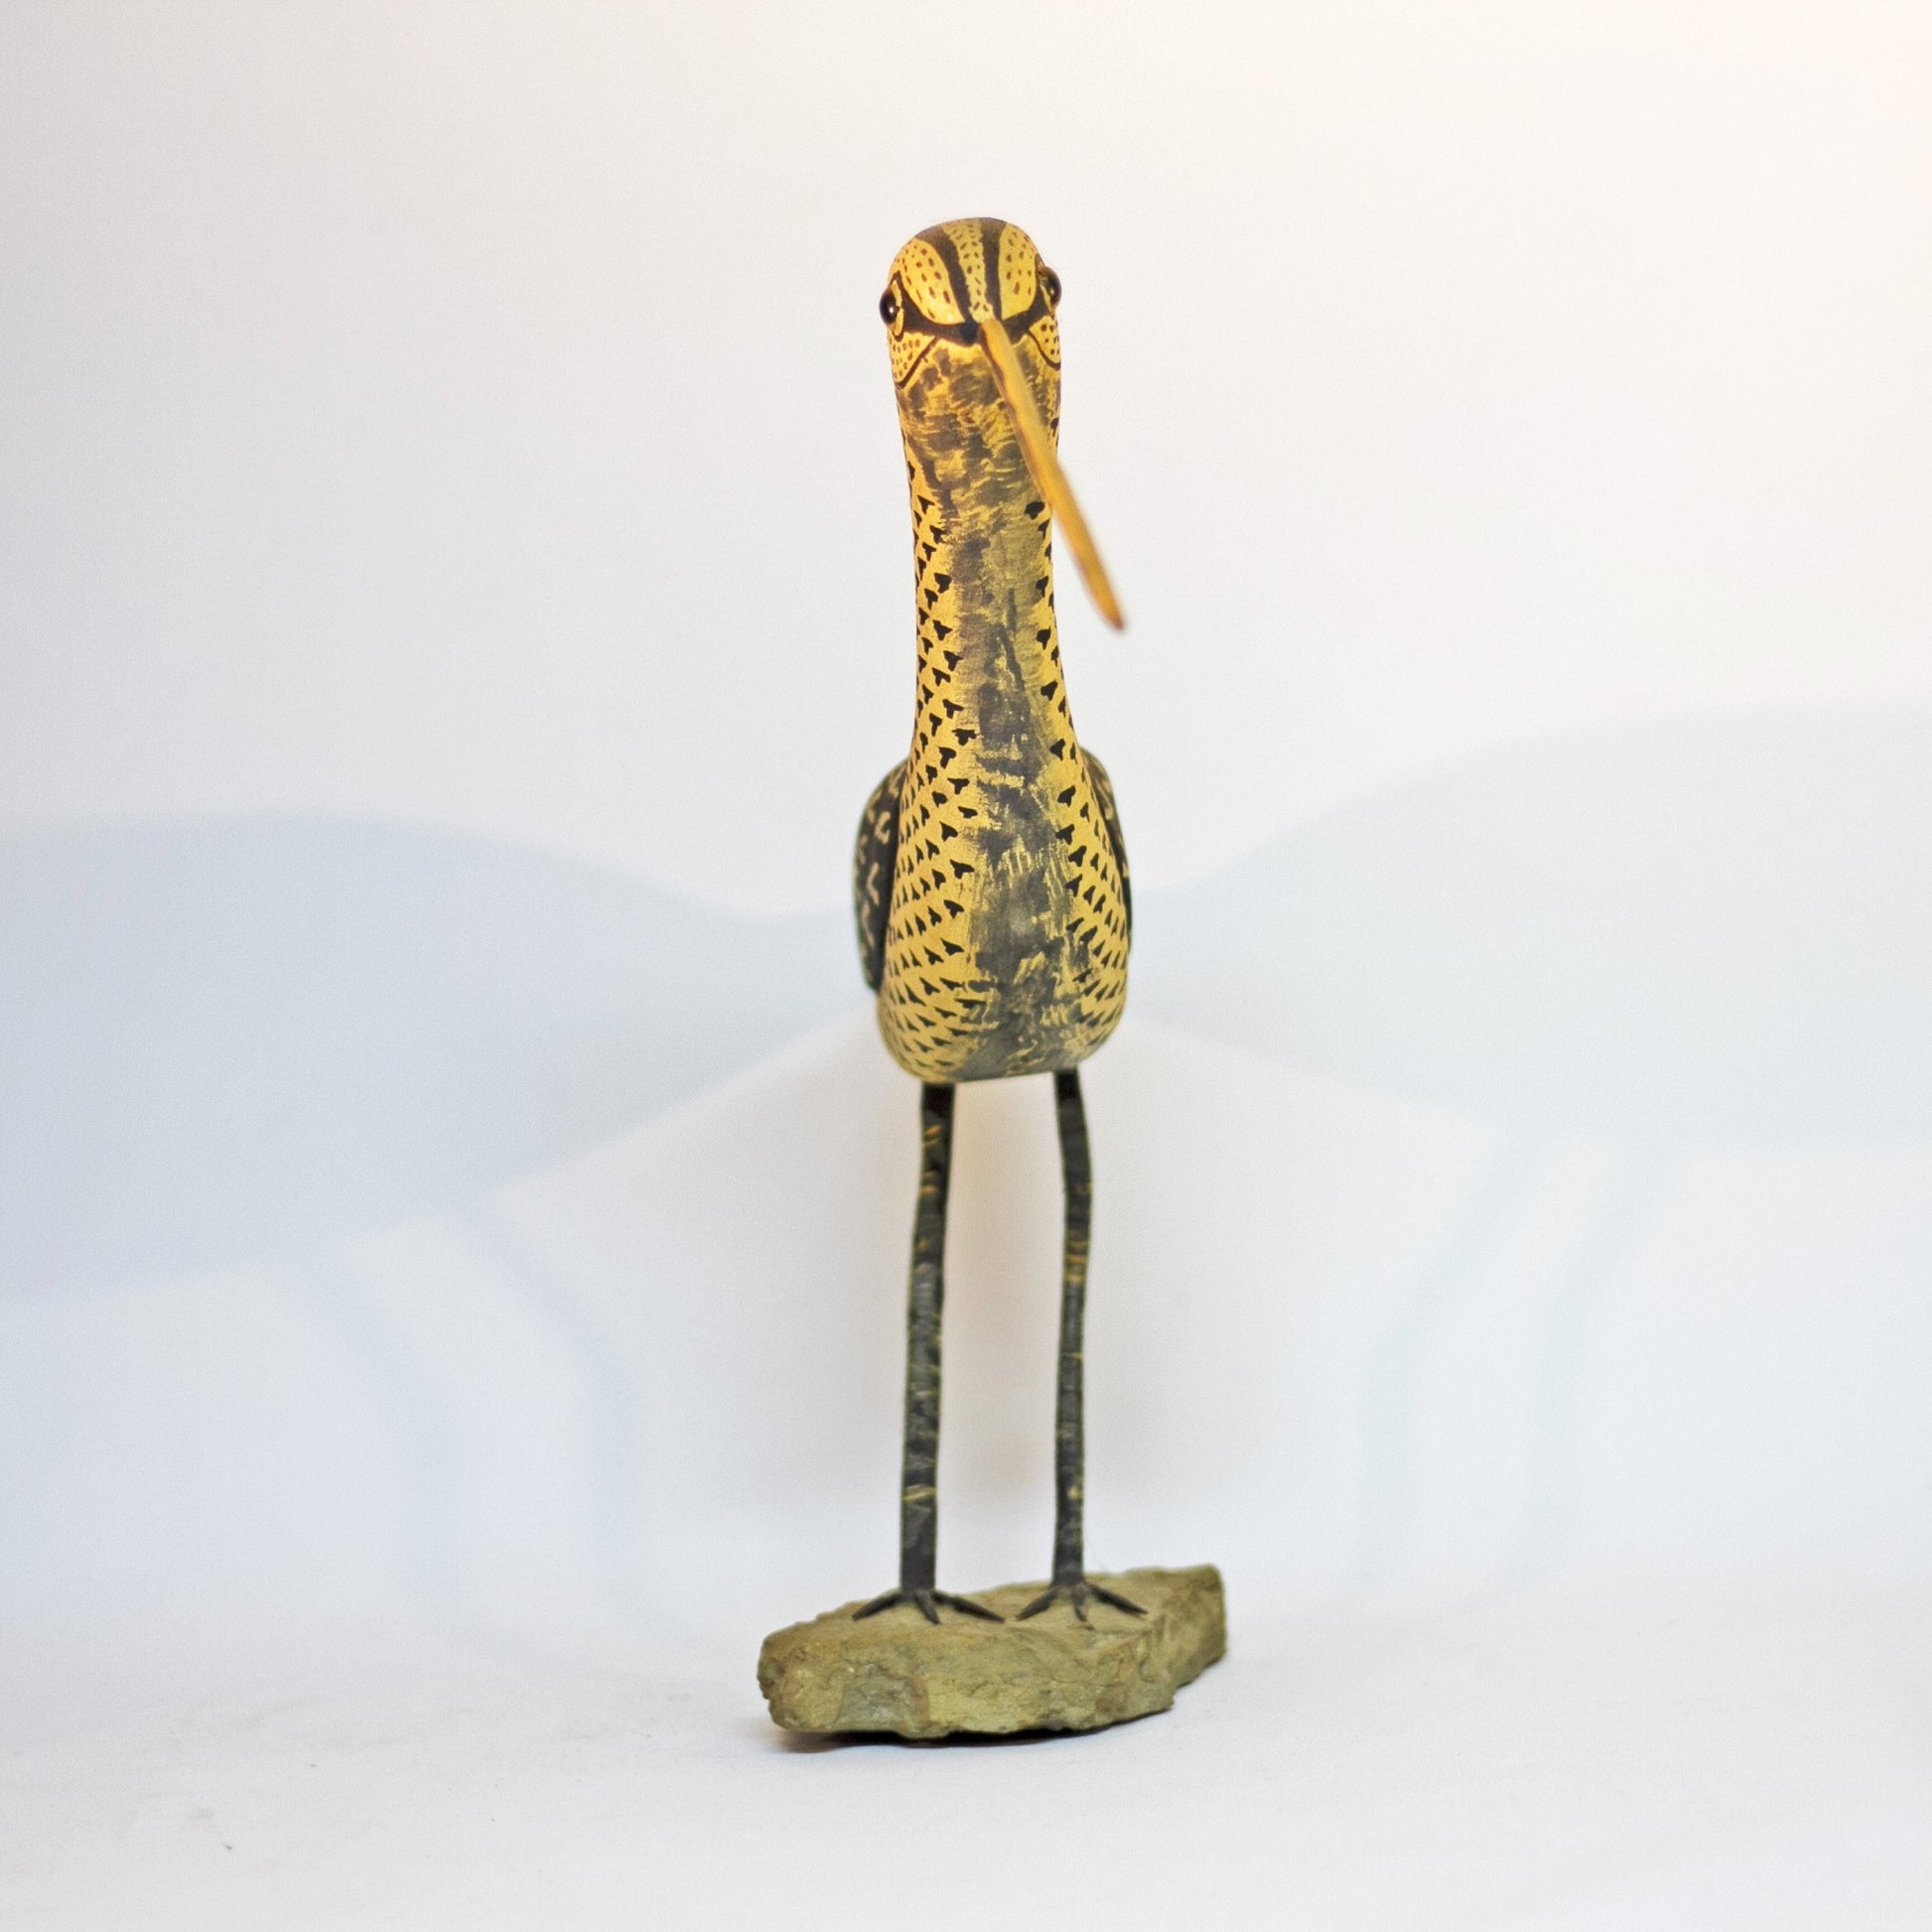 Hand Carved and Painted Folk Art LONG-BILLED SPECKLED CURLEW SHOREBIRD 11” Tall by AL SCHATZLE